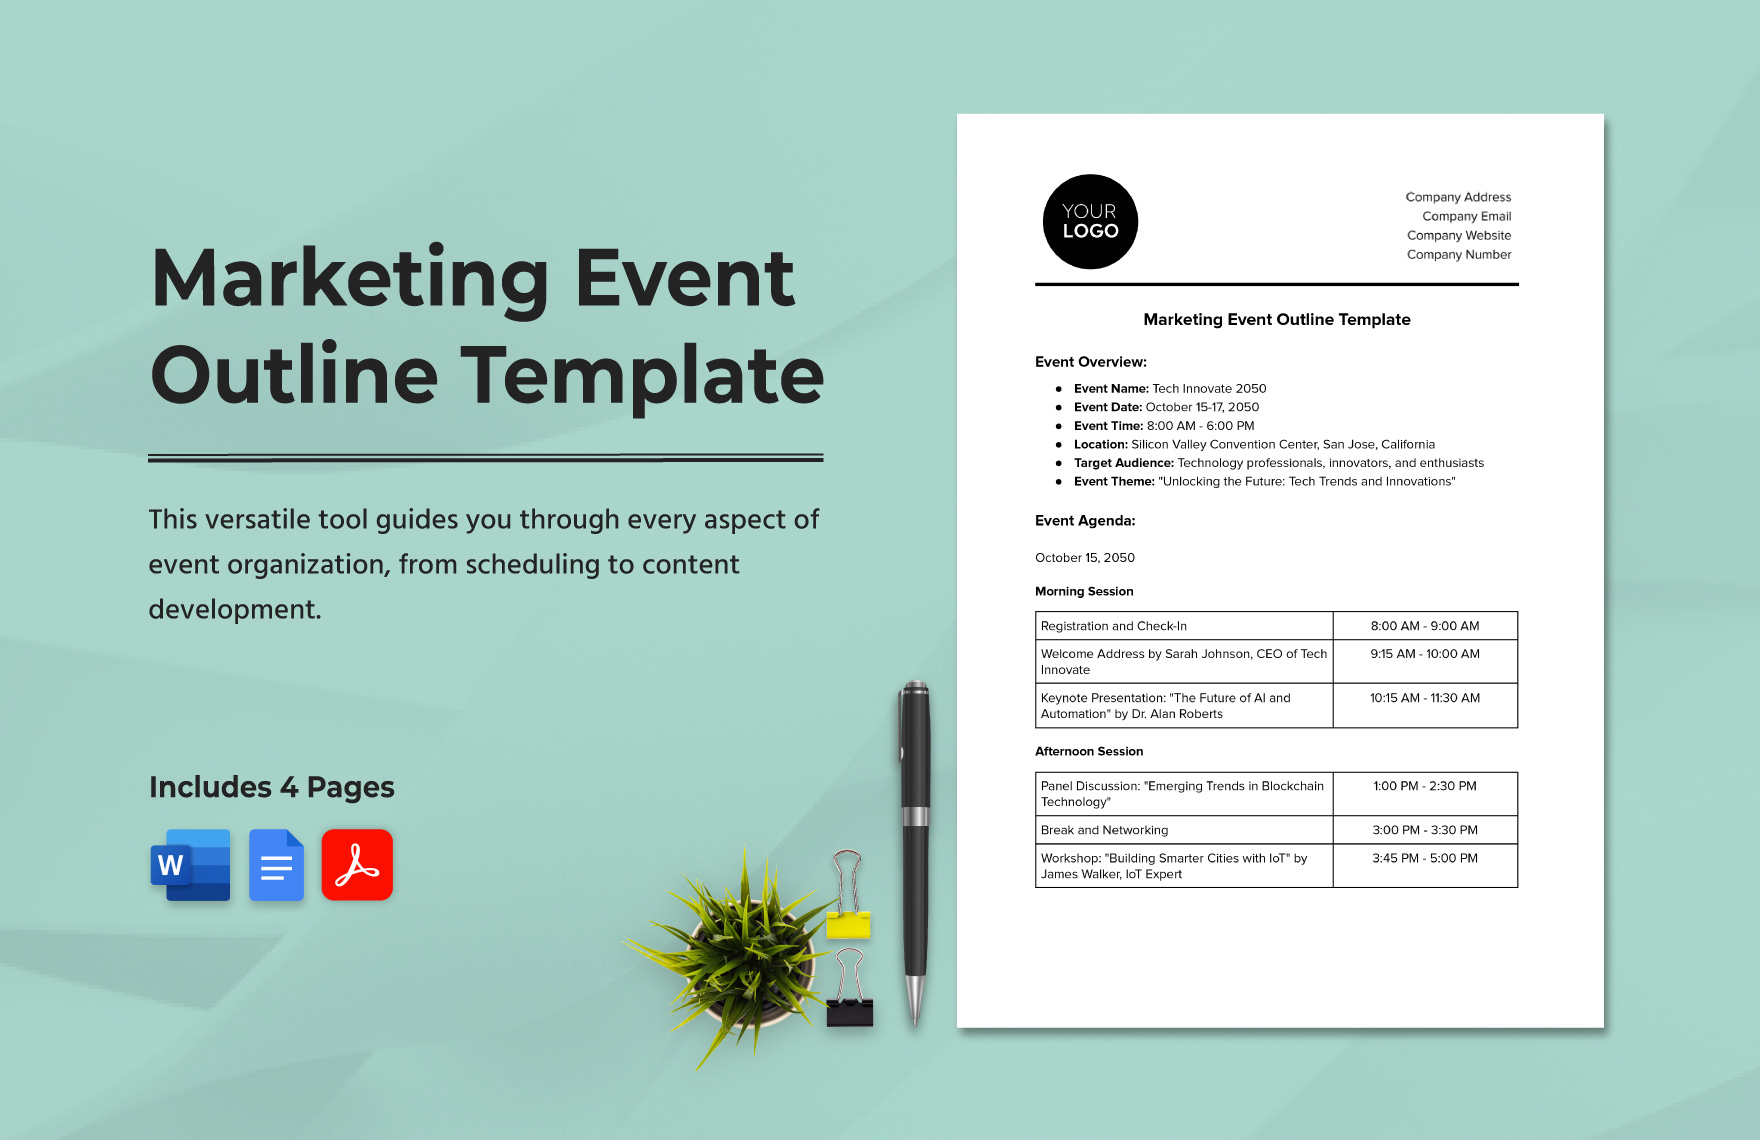 Marketing Event Outline Template in Word, Google Docs, PDF